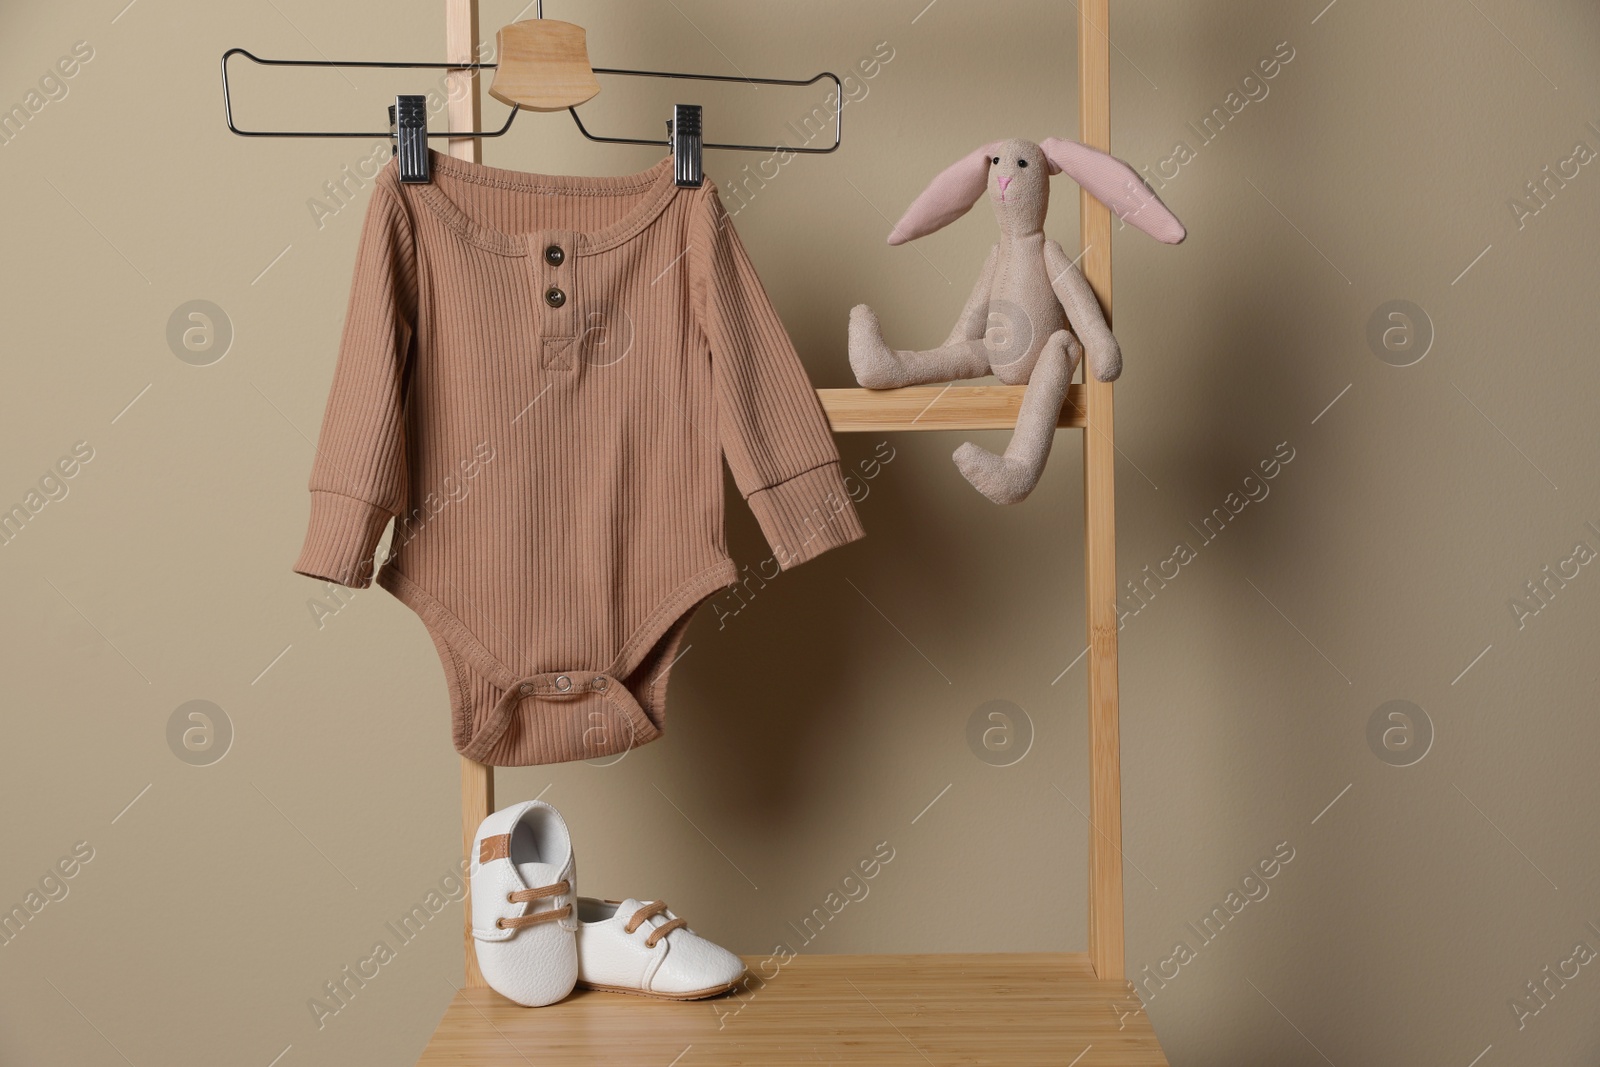 Photo of Baby bodysuit, shoes and toy bunny on chair near beige wall